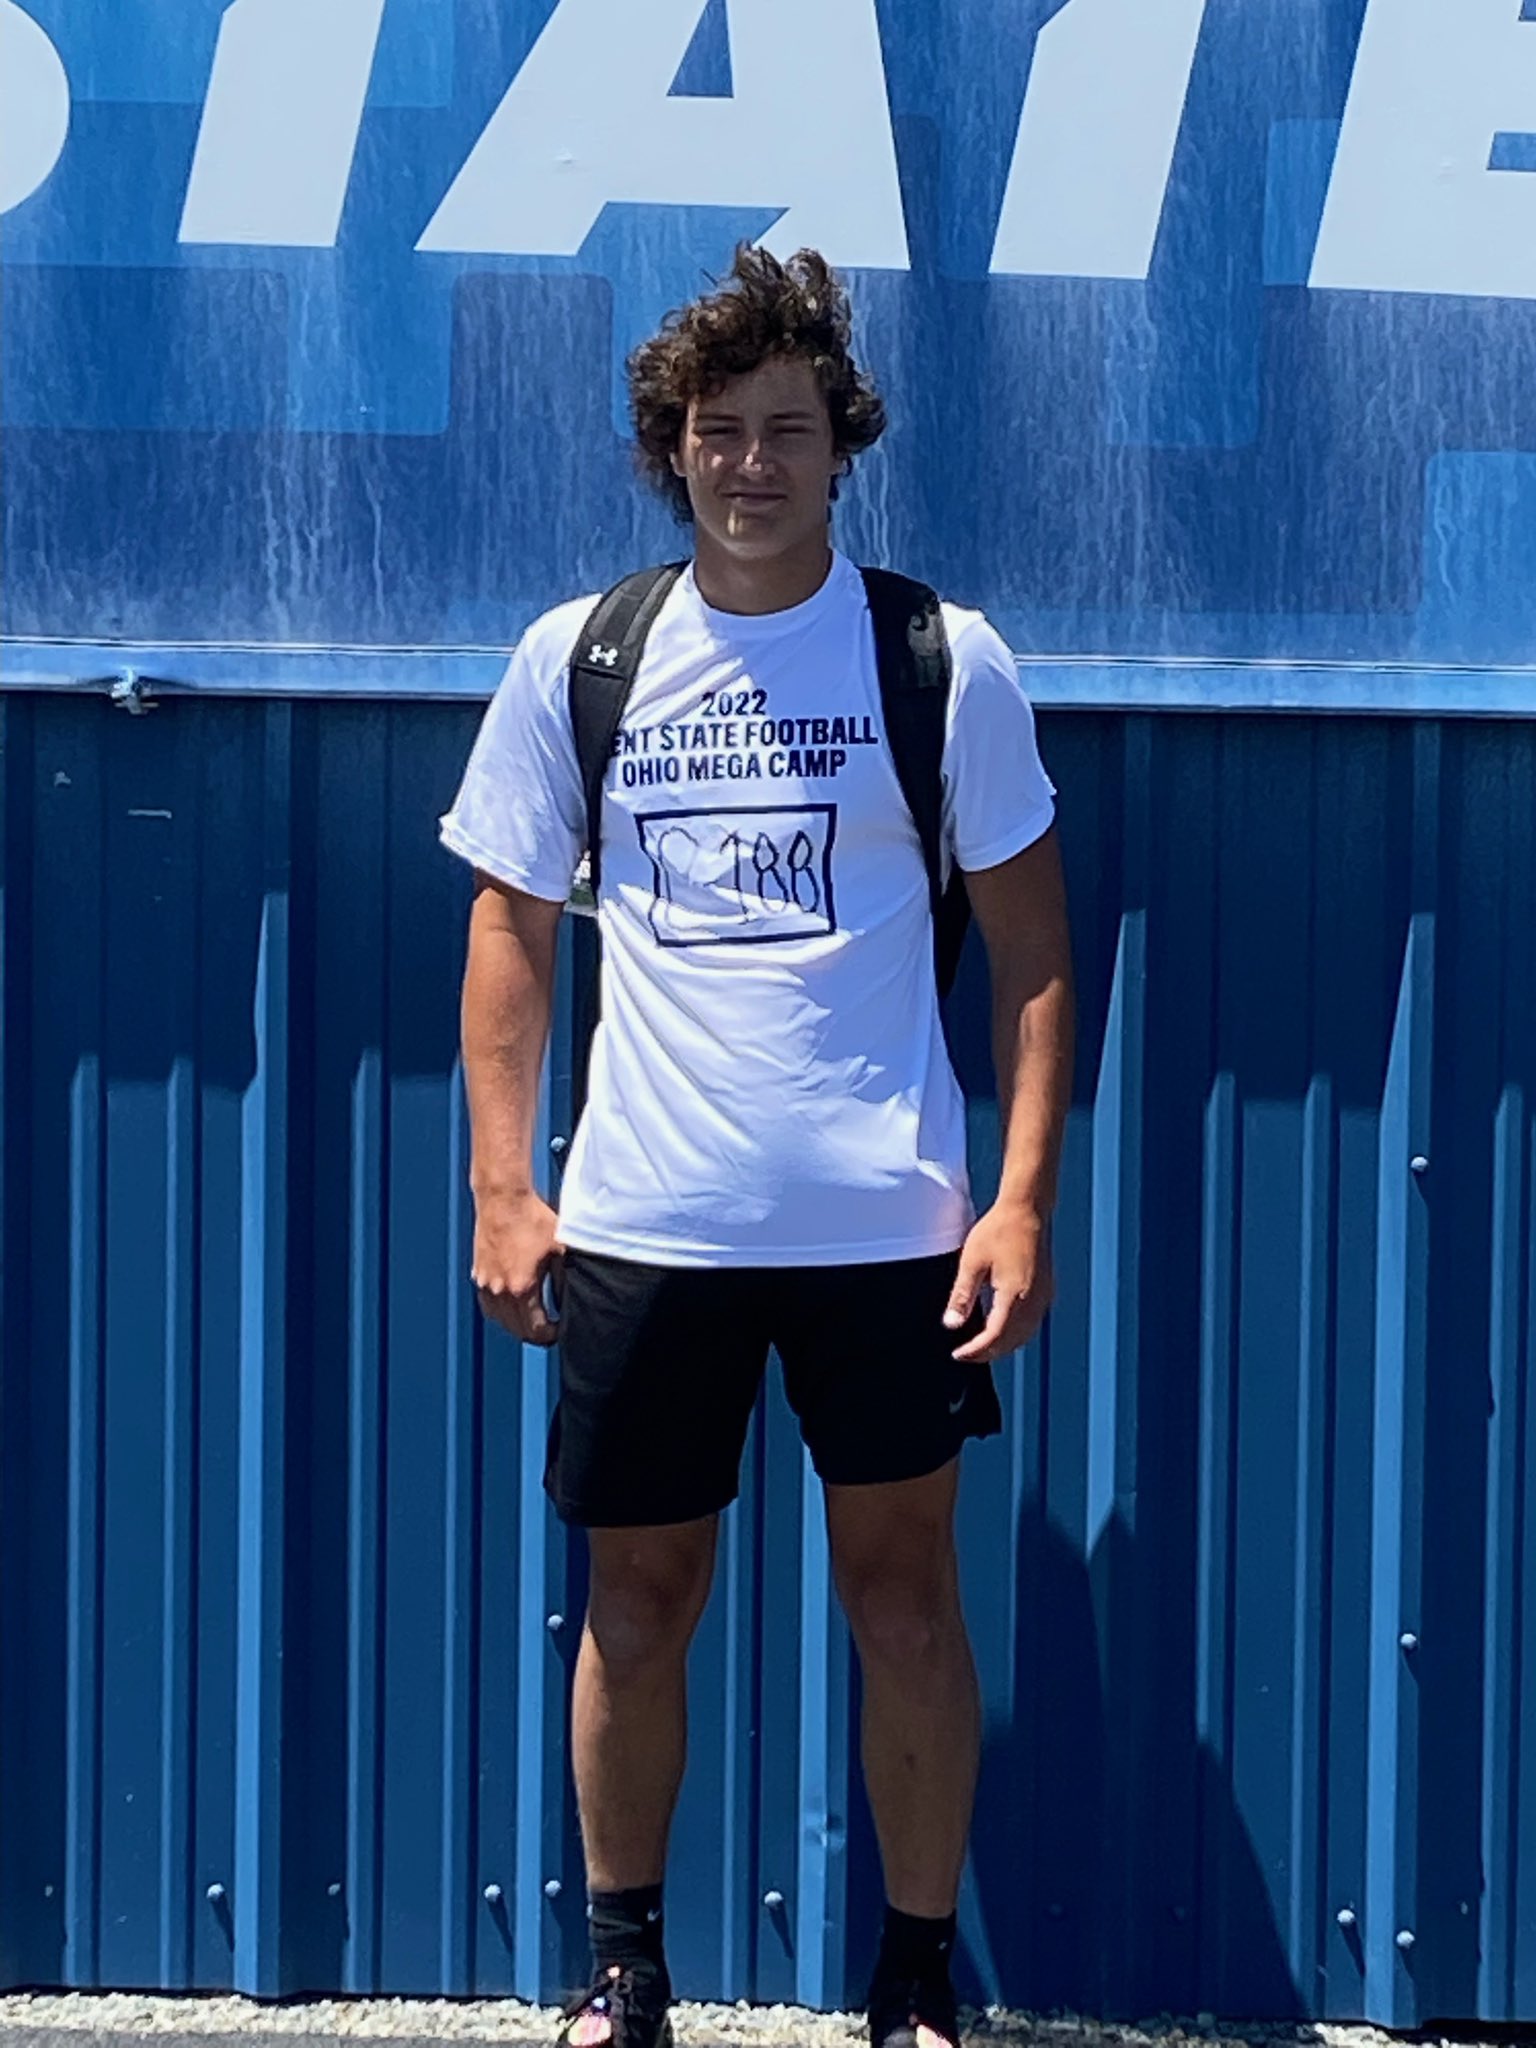 Jack Moore on Twitter "I had a great time at the Kent State Mega Camp